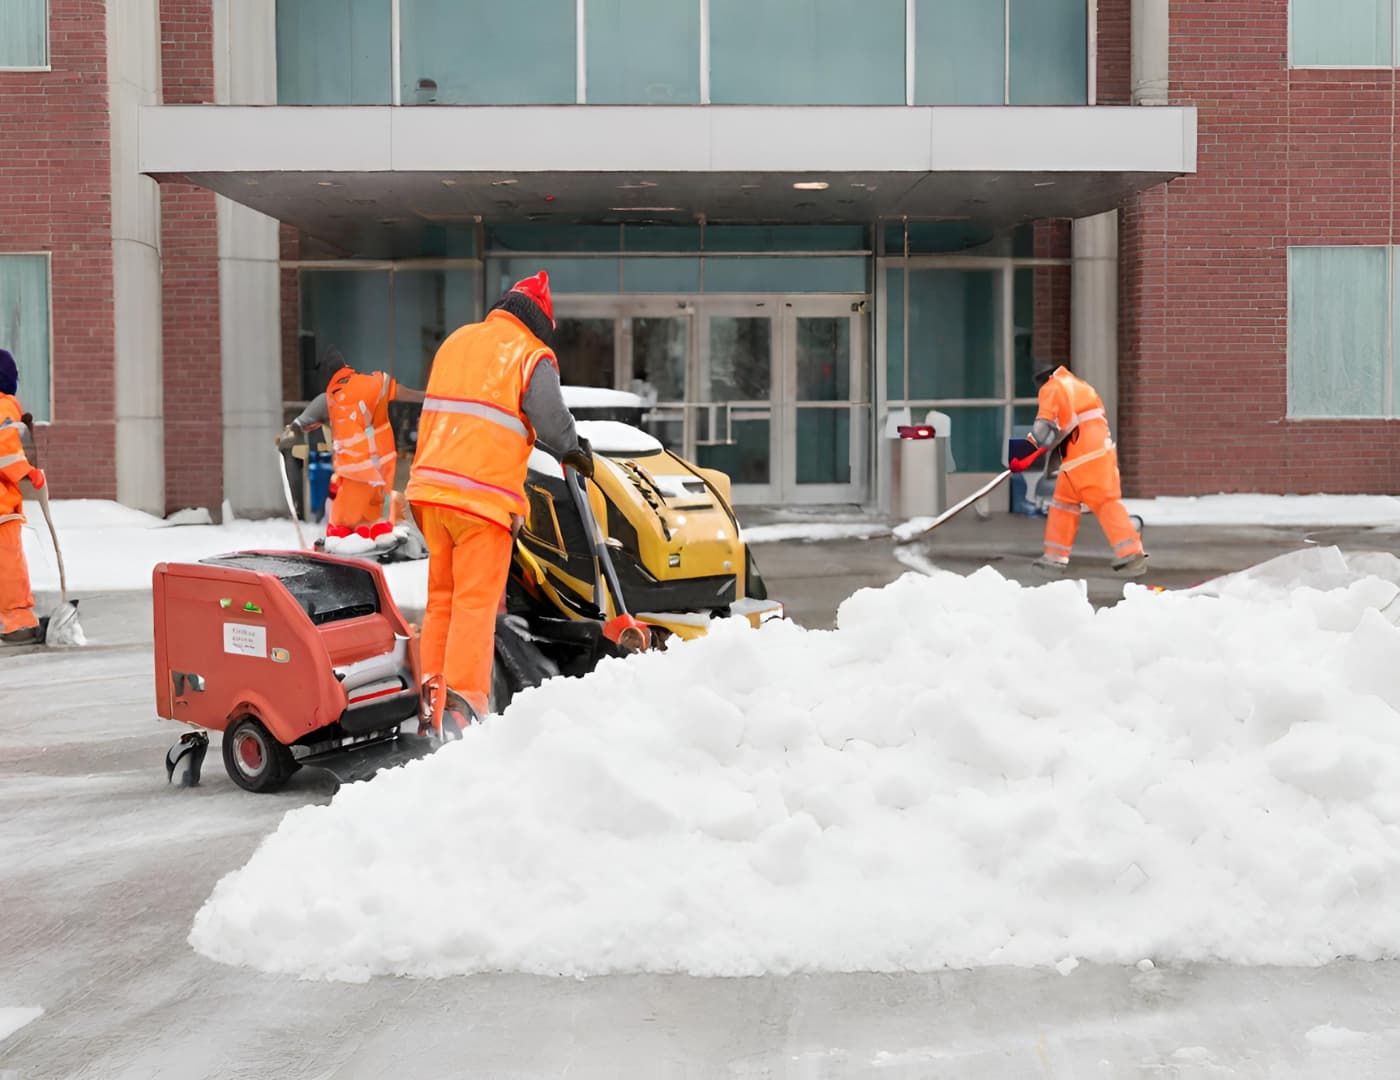 Emergency Snow Removal for Hospitals: Ensuring Access to Healthcare in Winter